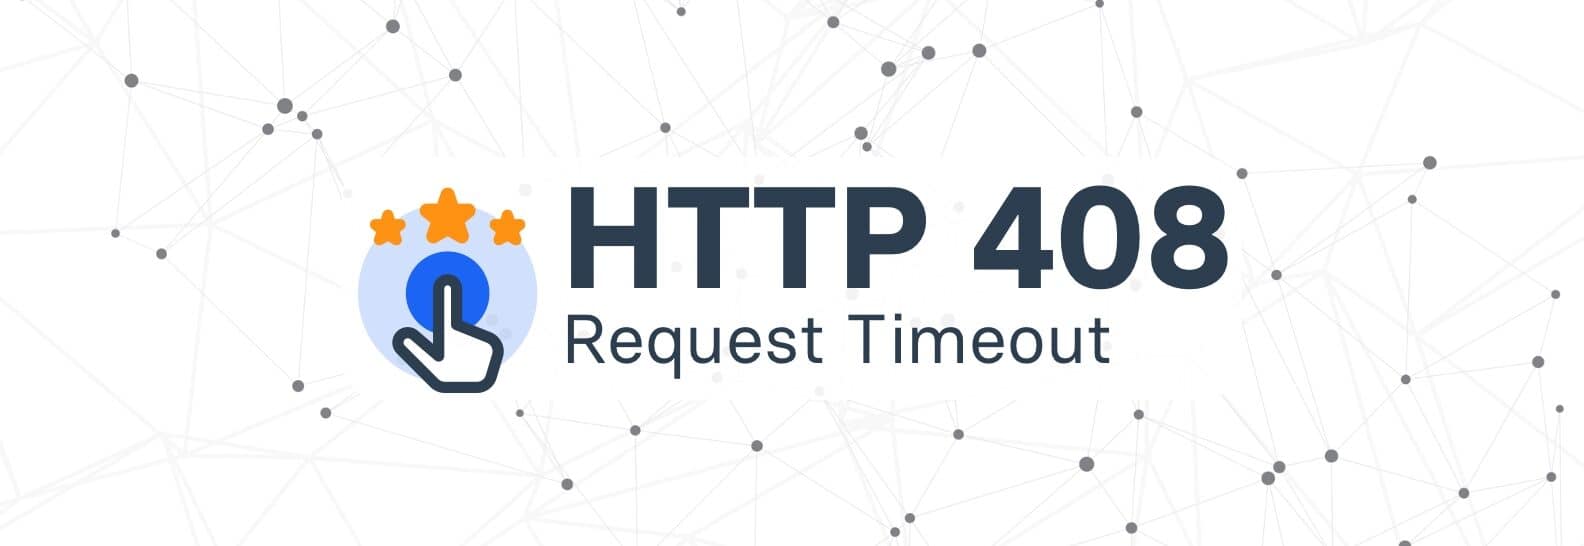 HTTP 408 (Request Timeout)